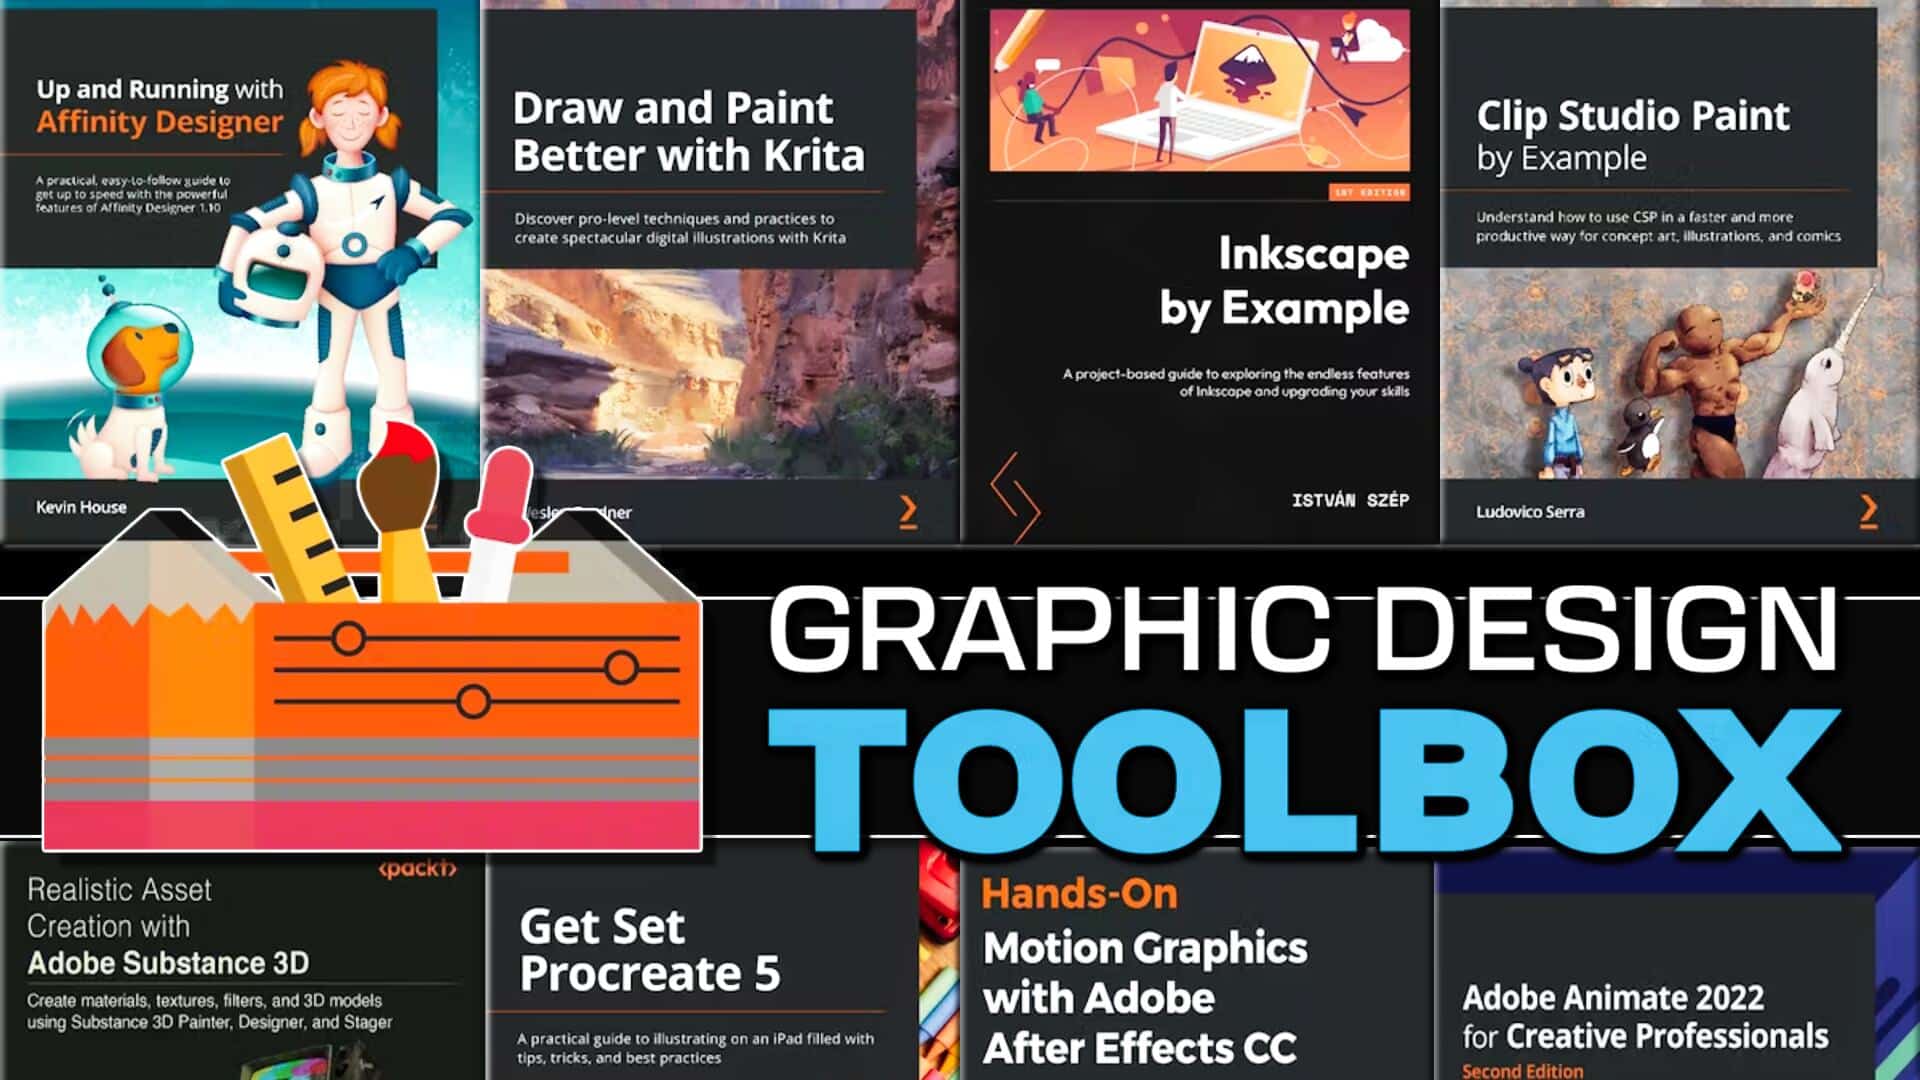 Design Toolbox is a Packt ebook Humble Bundle of graphics software includin...